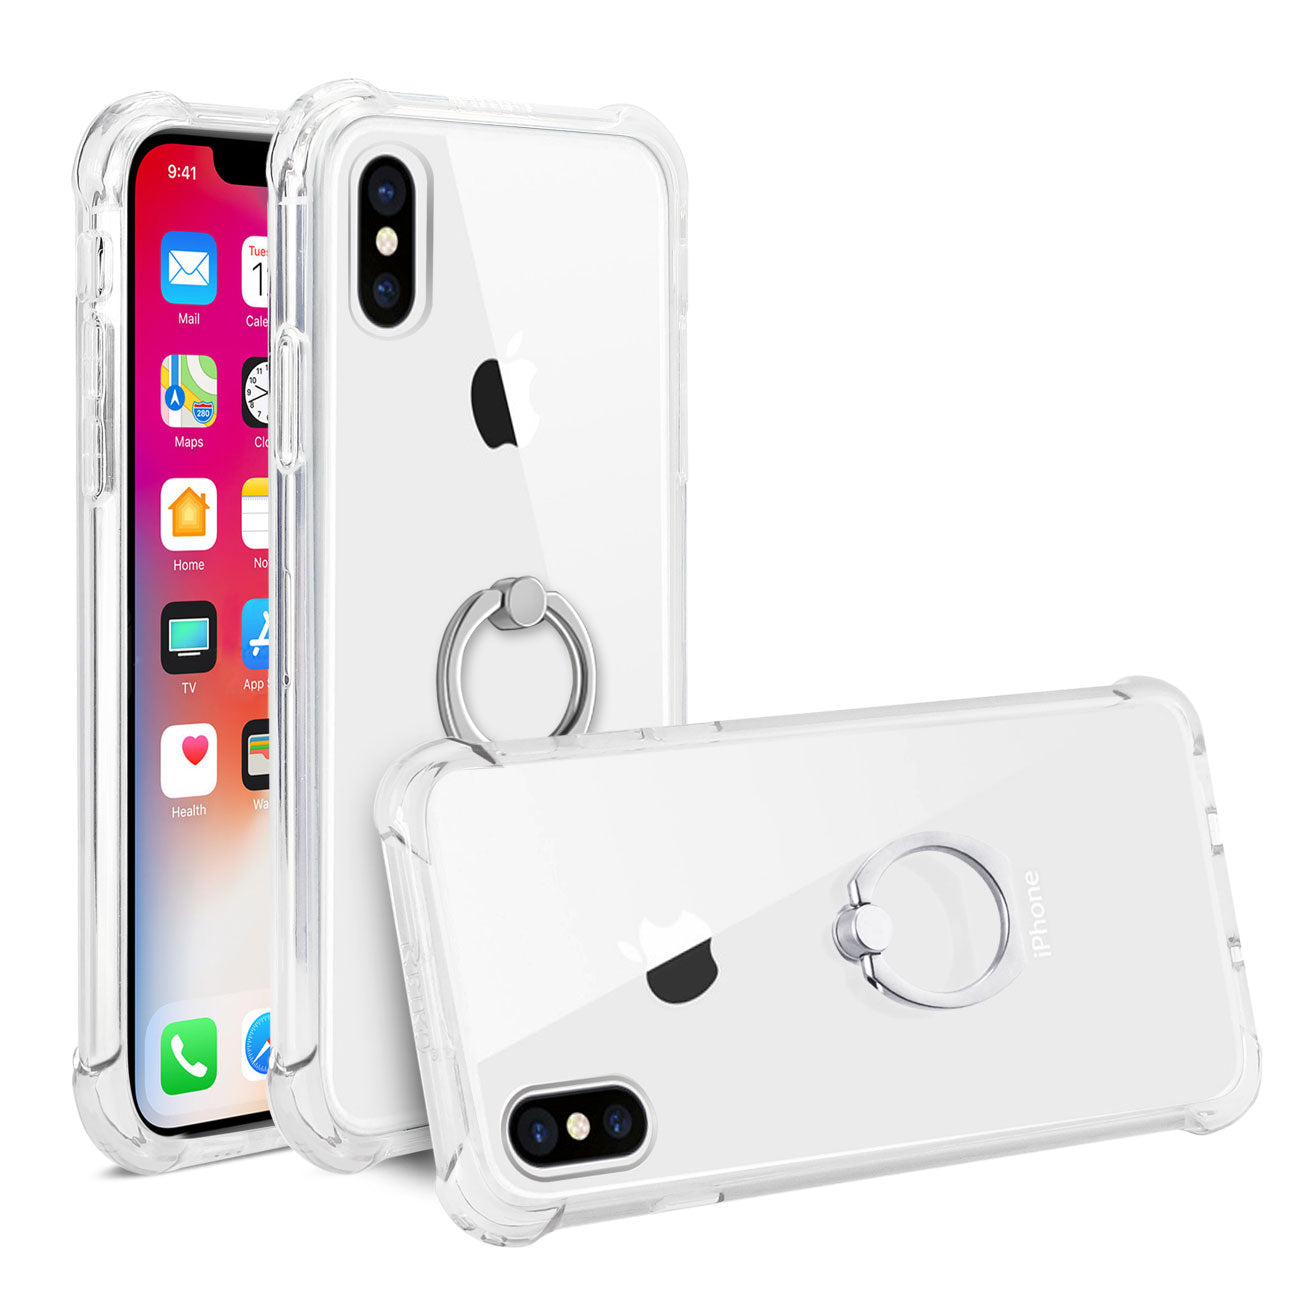 Reiko iPhone X/iPhone XS Transparent Air Cushion Protector Bumper Case With Ring Holder In Clear